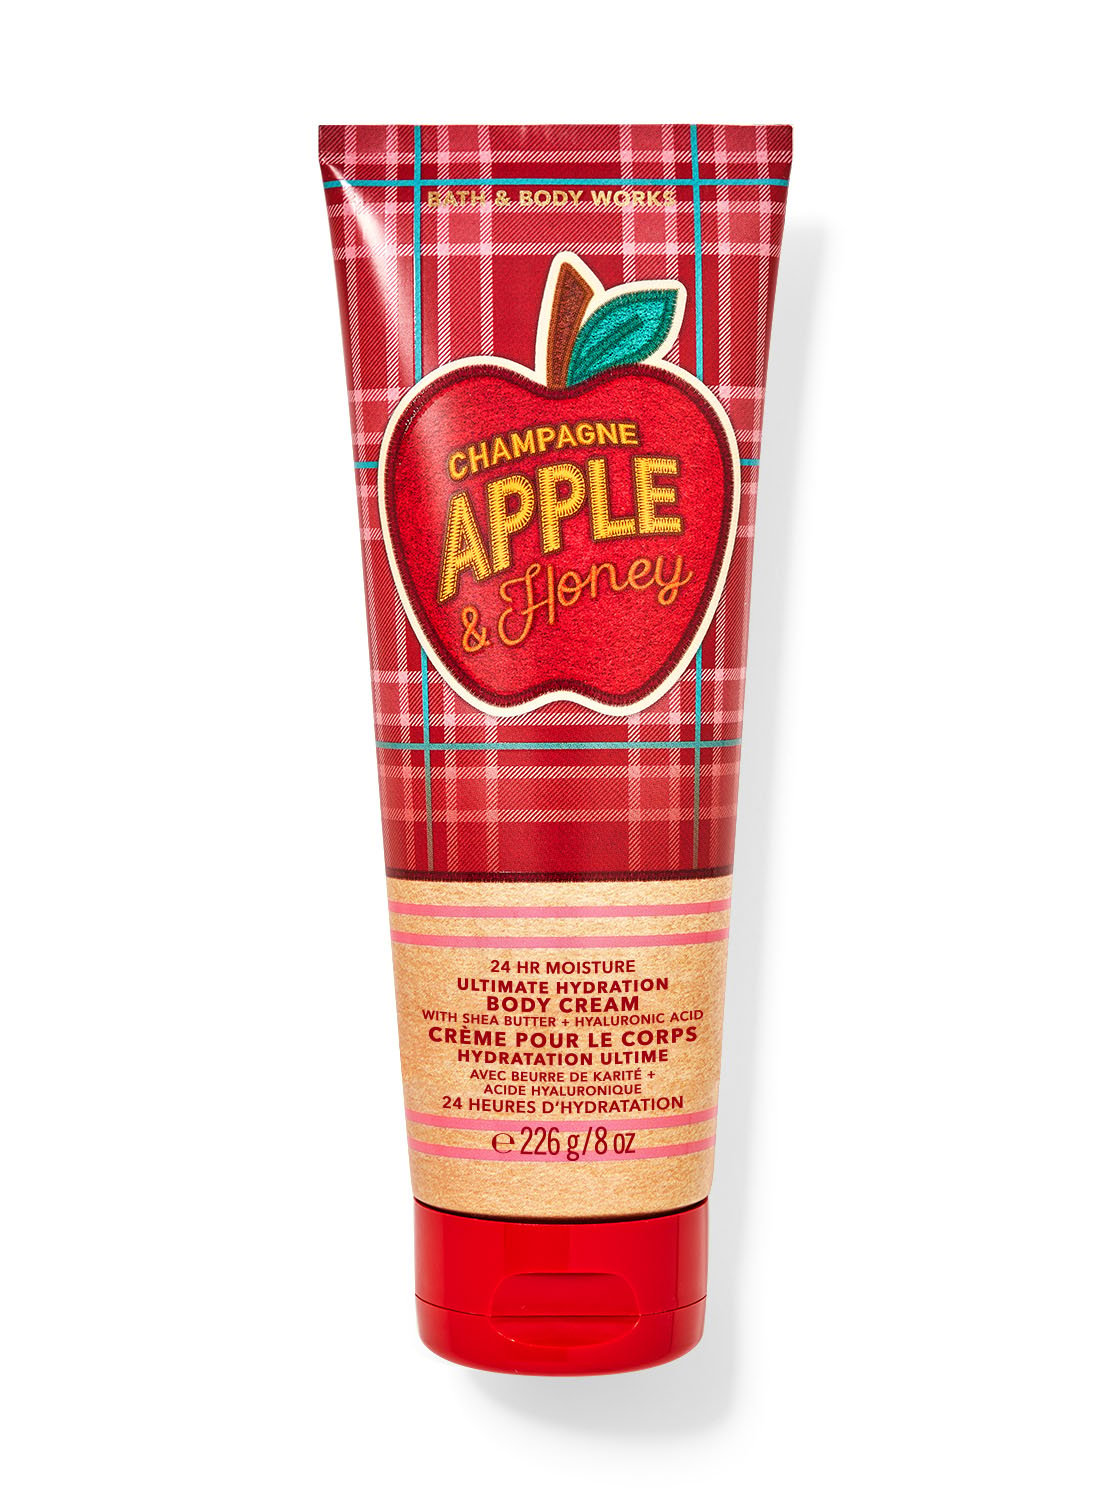 Champagne Apple & Honey Ultimate Hydration Body Cream | Bath and Body Works